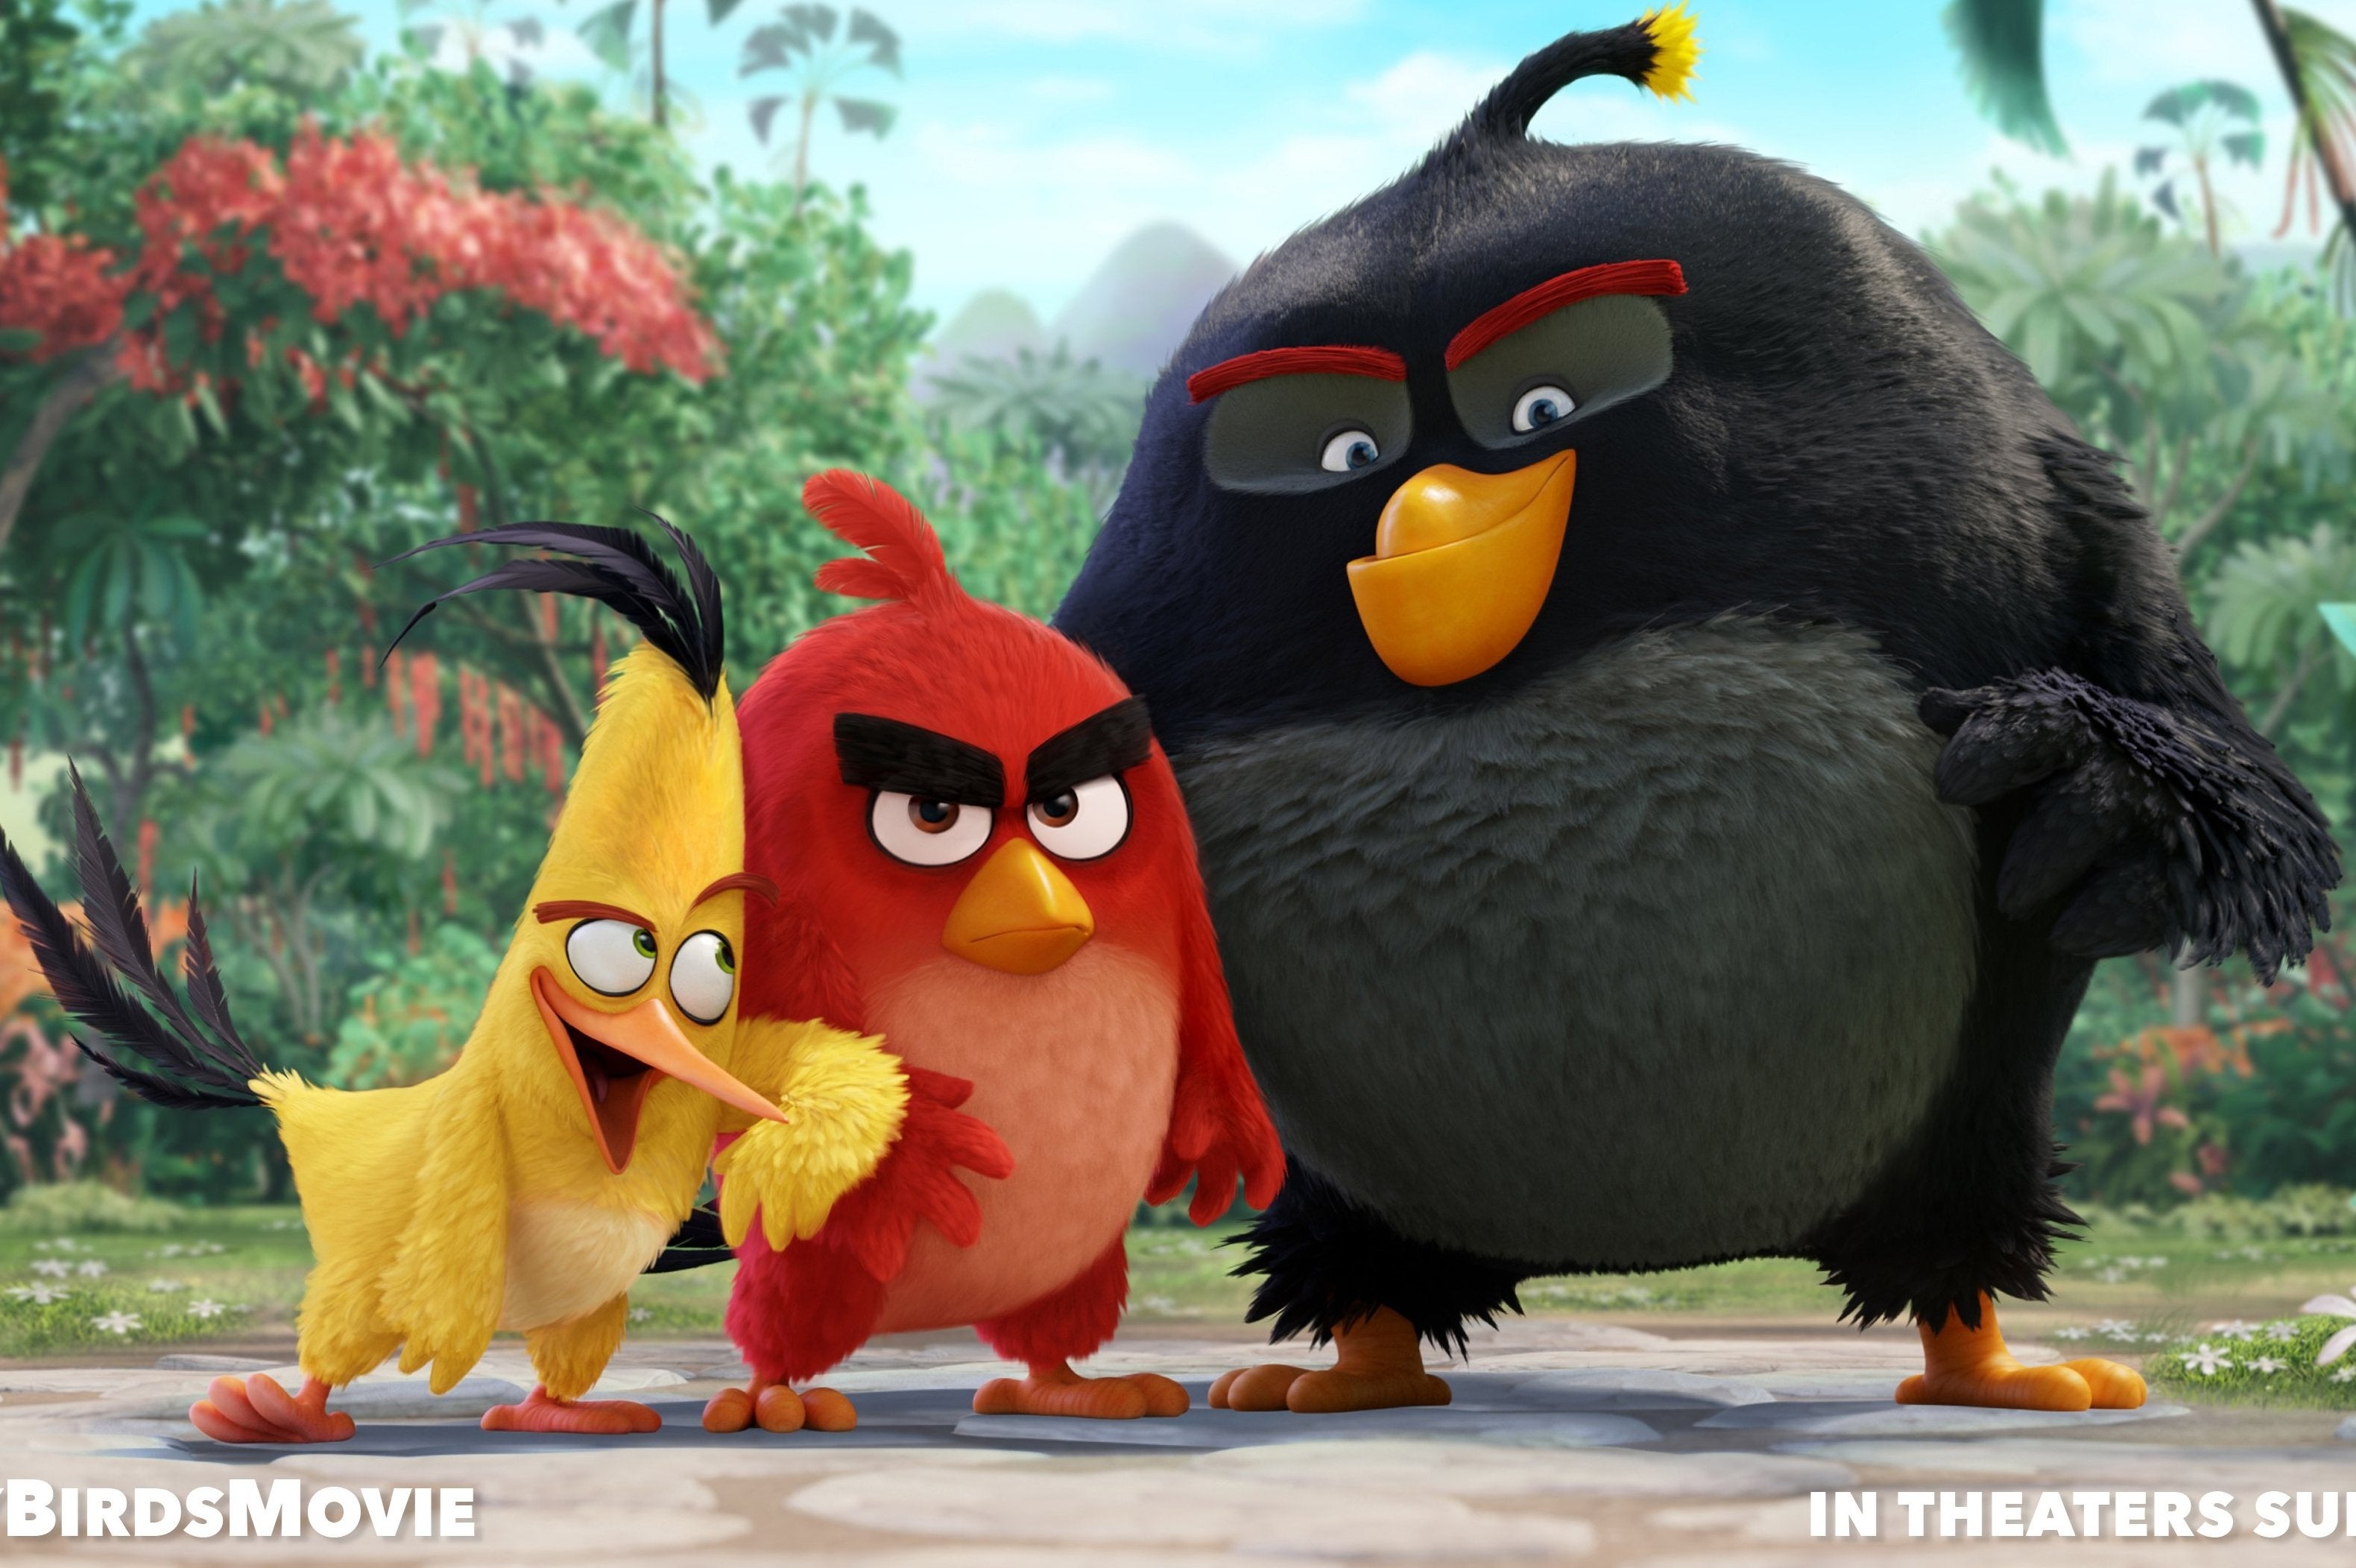 Image for Angry Birds film casts Peter Dinklage, Bill Hader and Jason Sudeikis